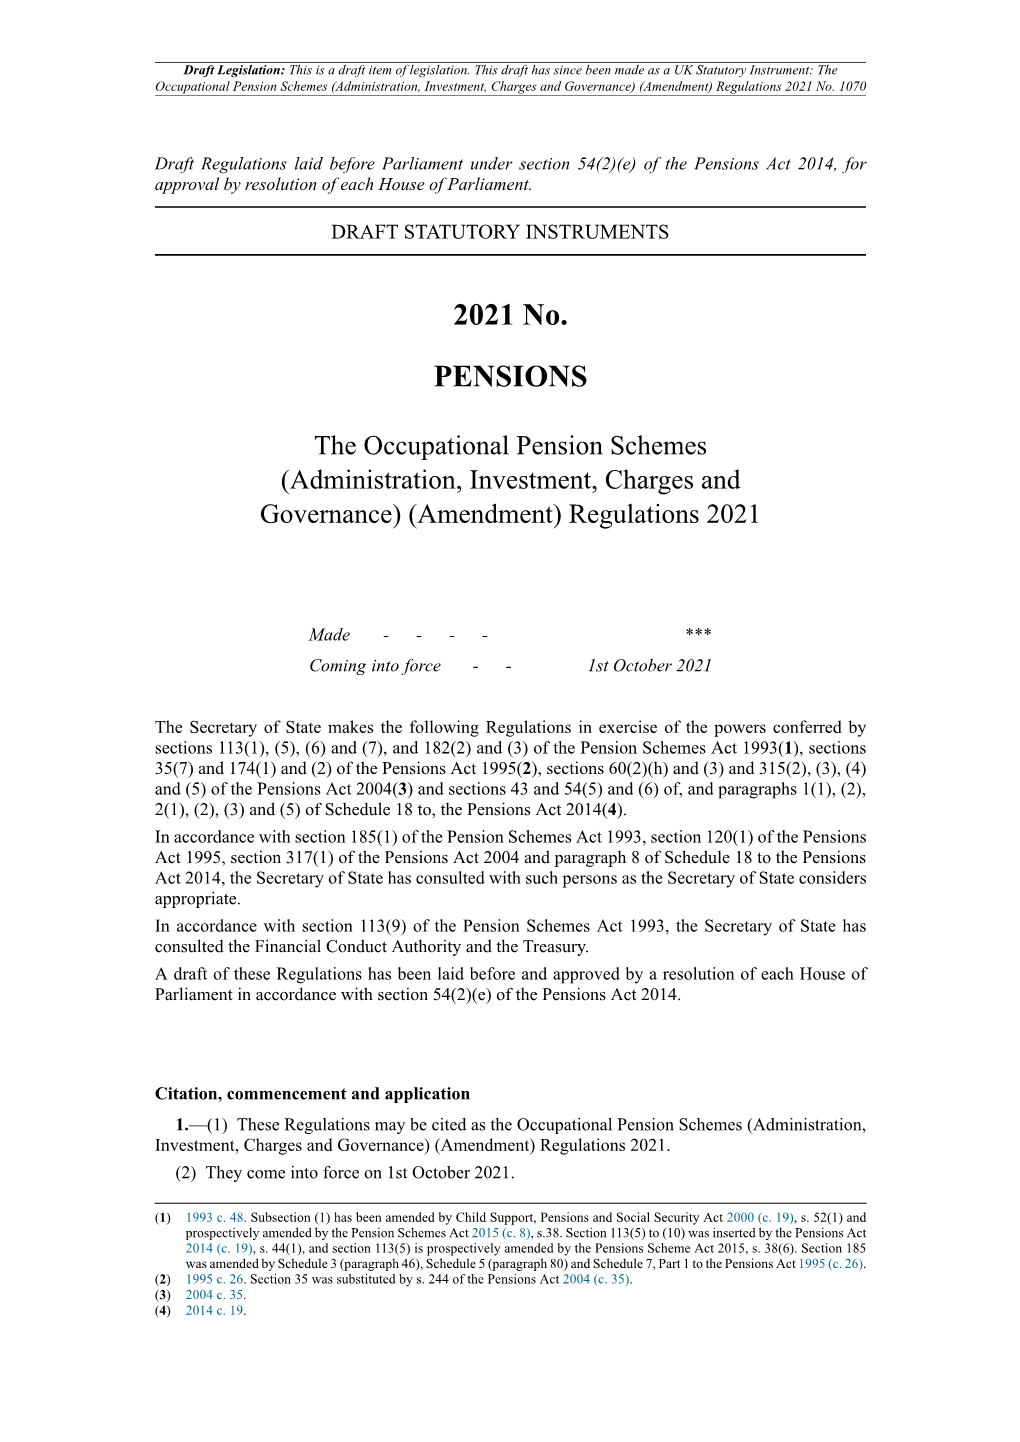 The Occupational Pension Schemes (Administration, Investment, Charges and Governance) (Amendment) Regulations 2021 No